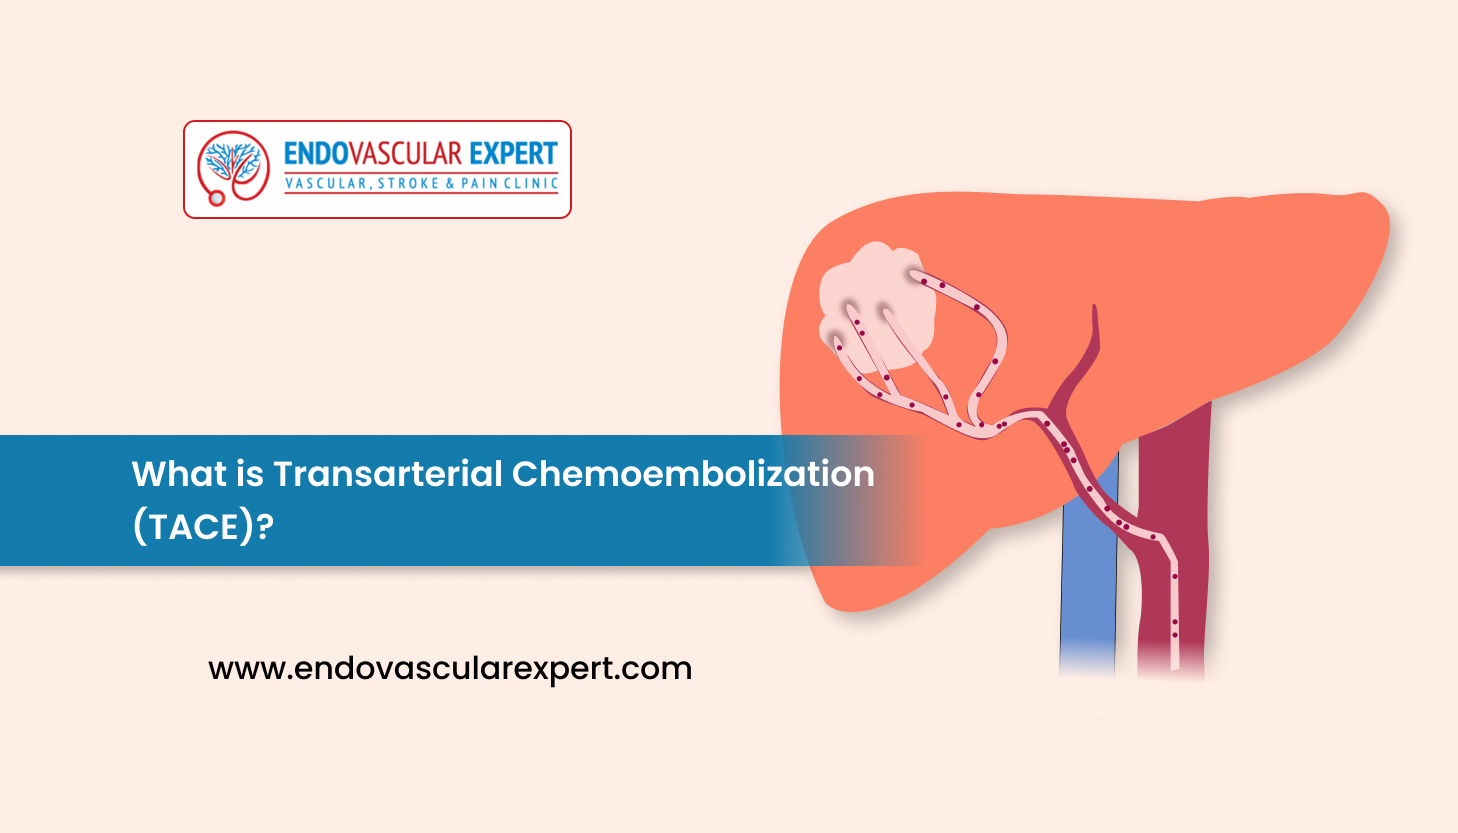 What is Transarterial Chemoembolization